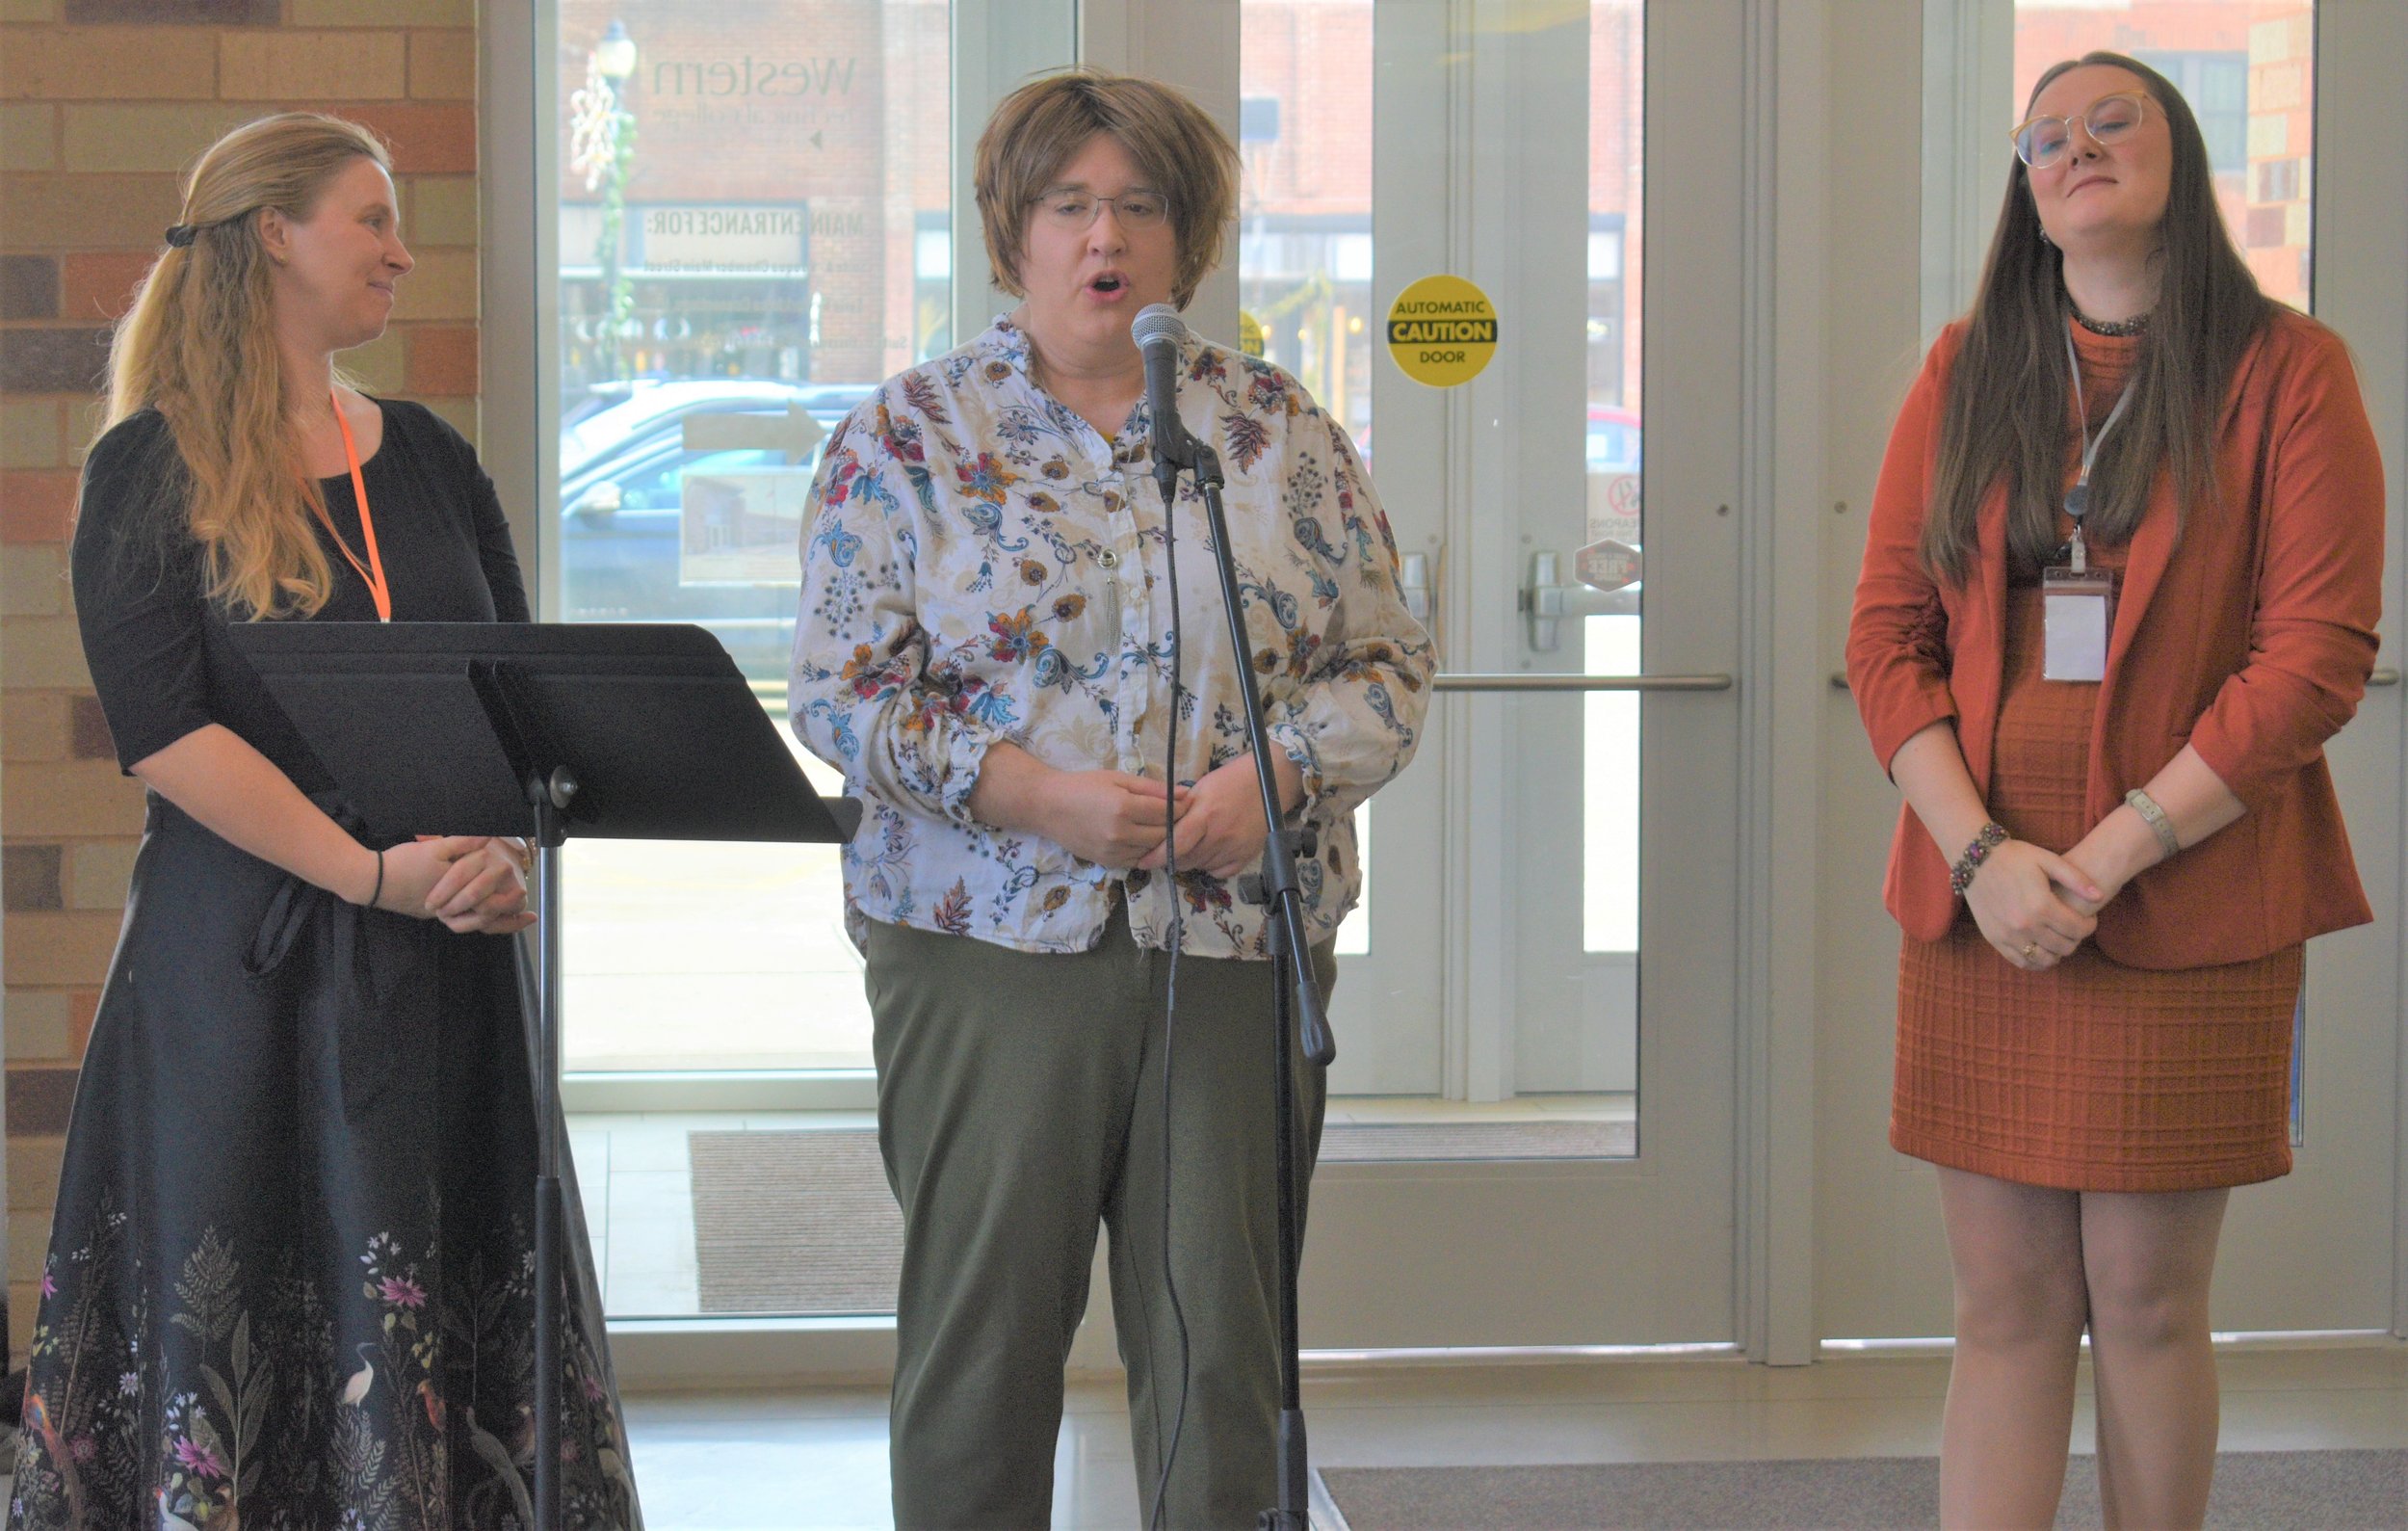  L to R: Laci Sheldon Youth Services Director, Trina Erickson Library Director, and Maggie Strittmater Adult Programming and Outreach Assistant 